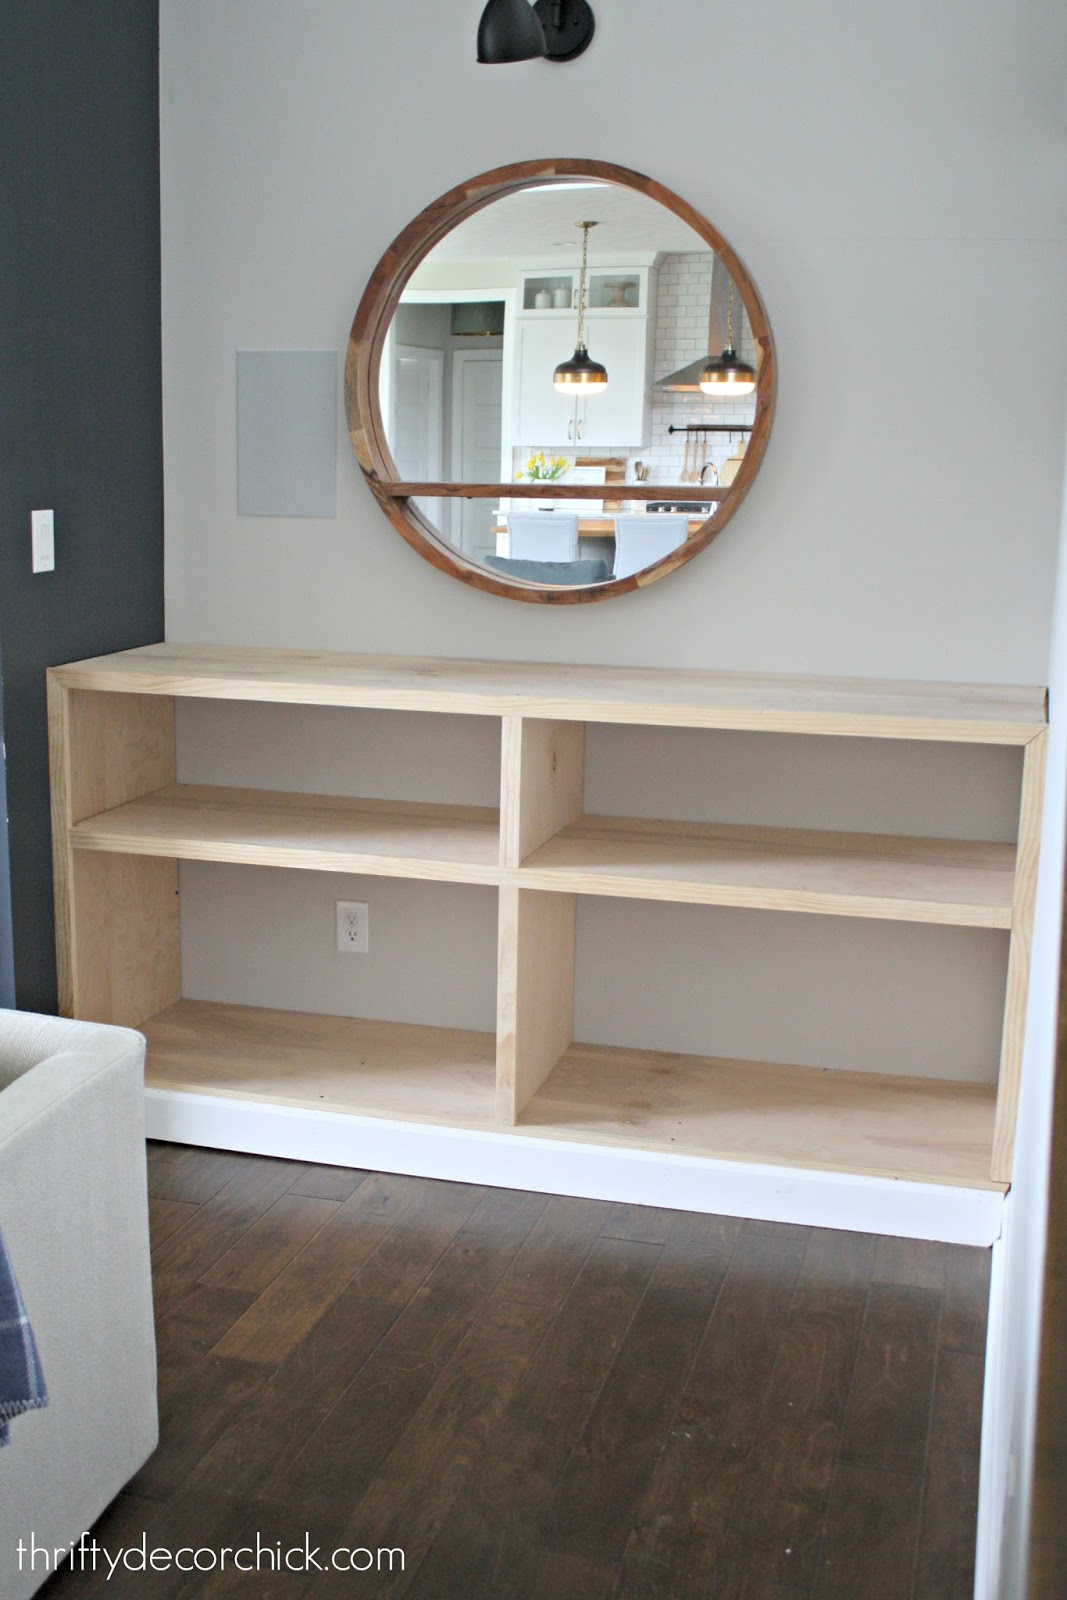 Built in bookcase by fireplace